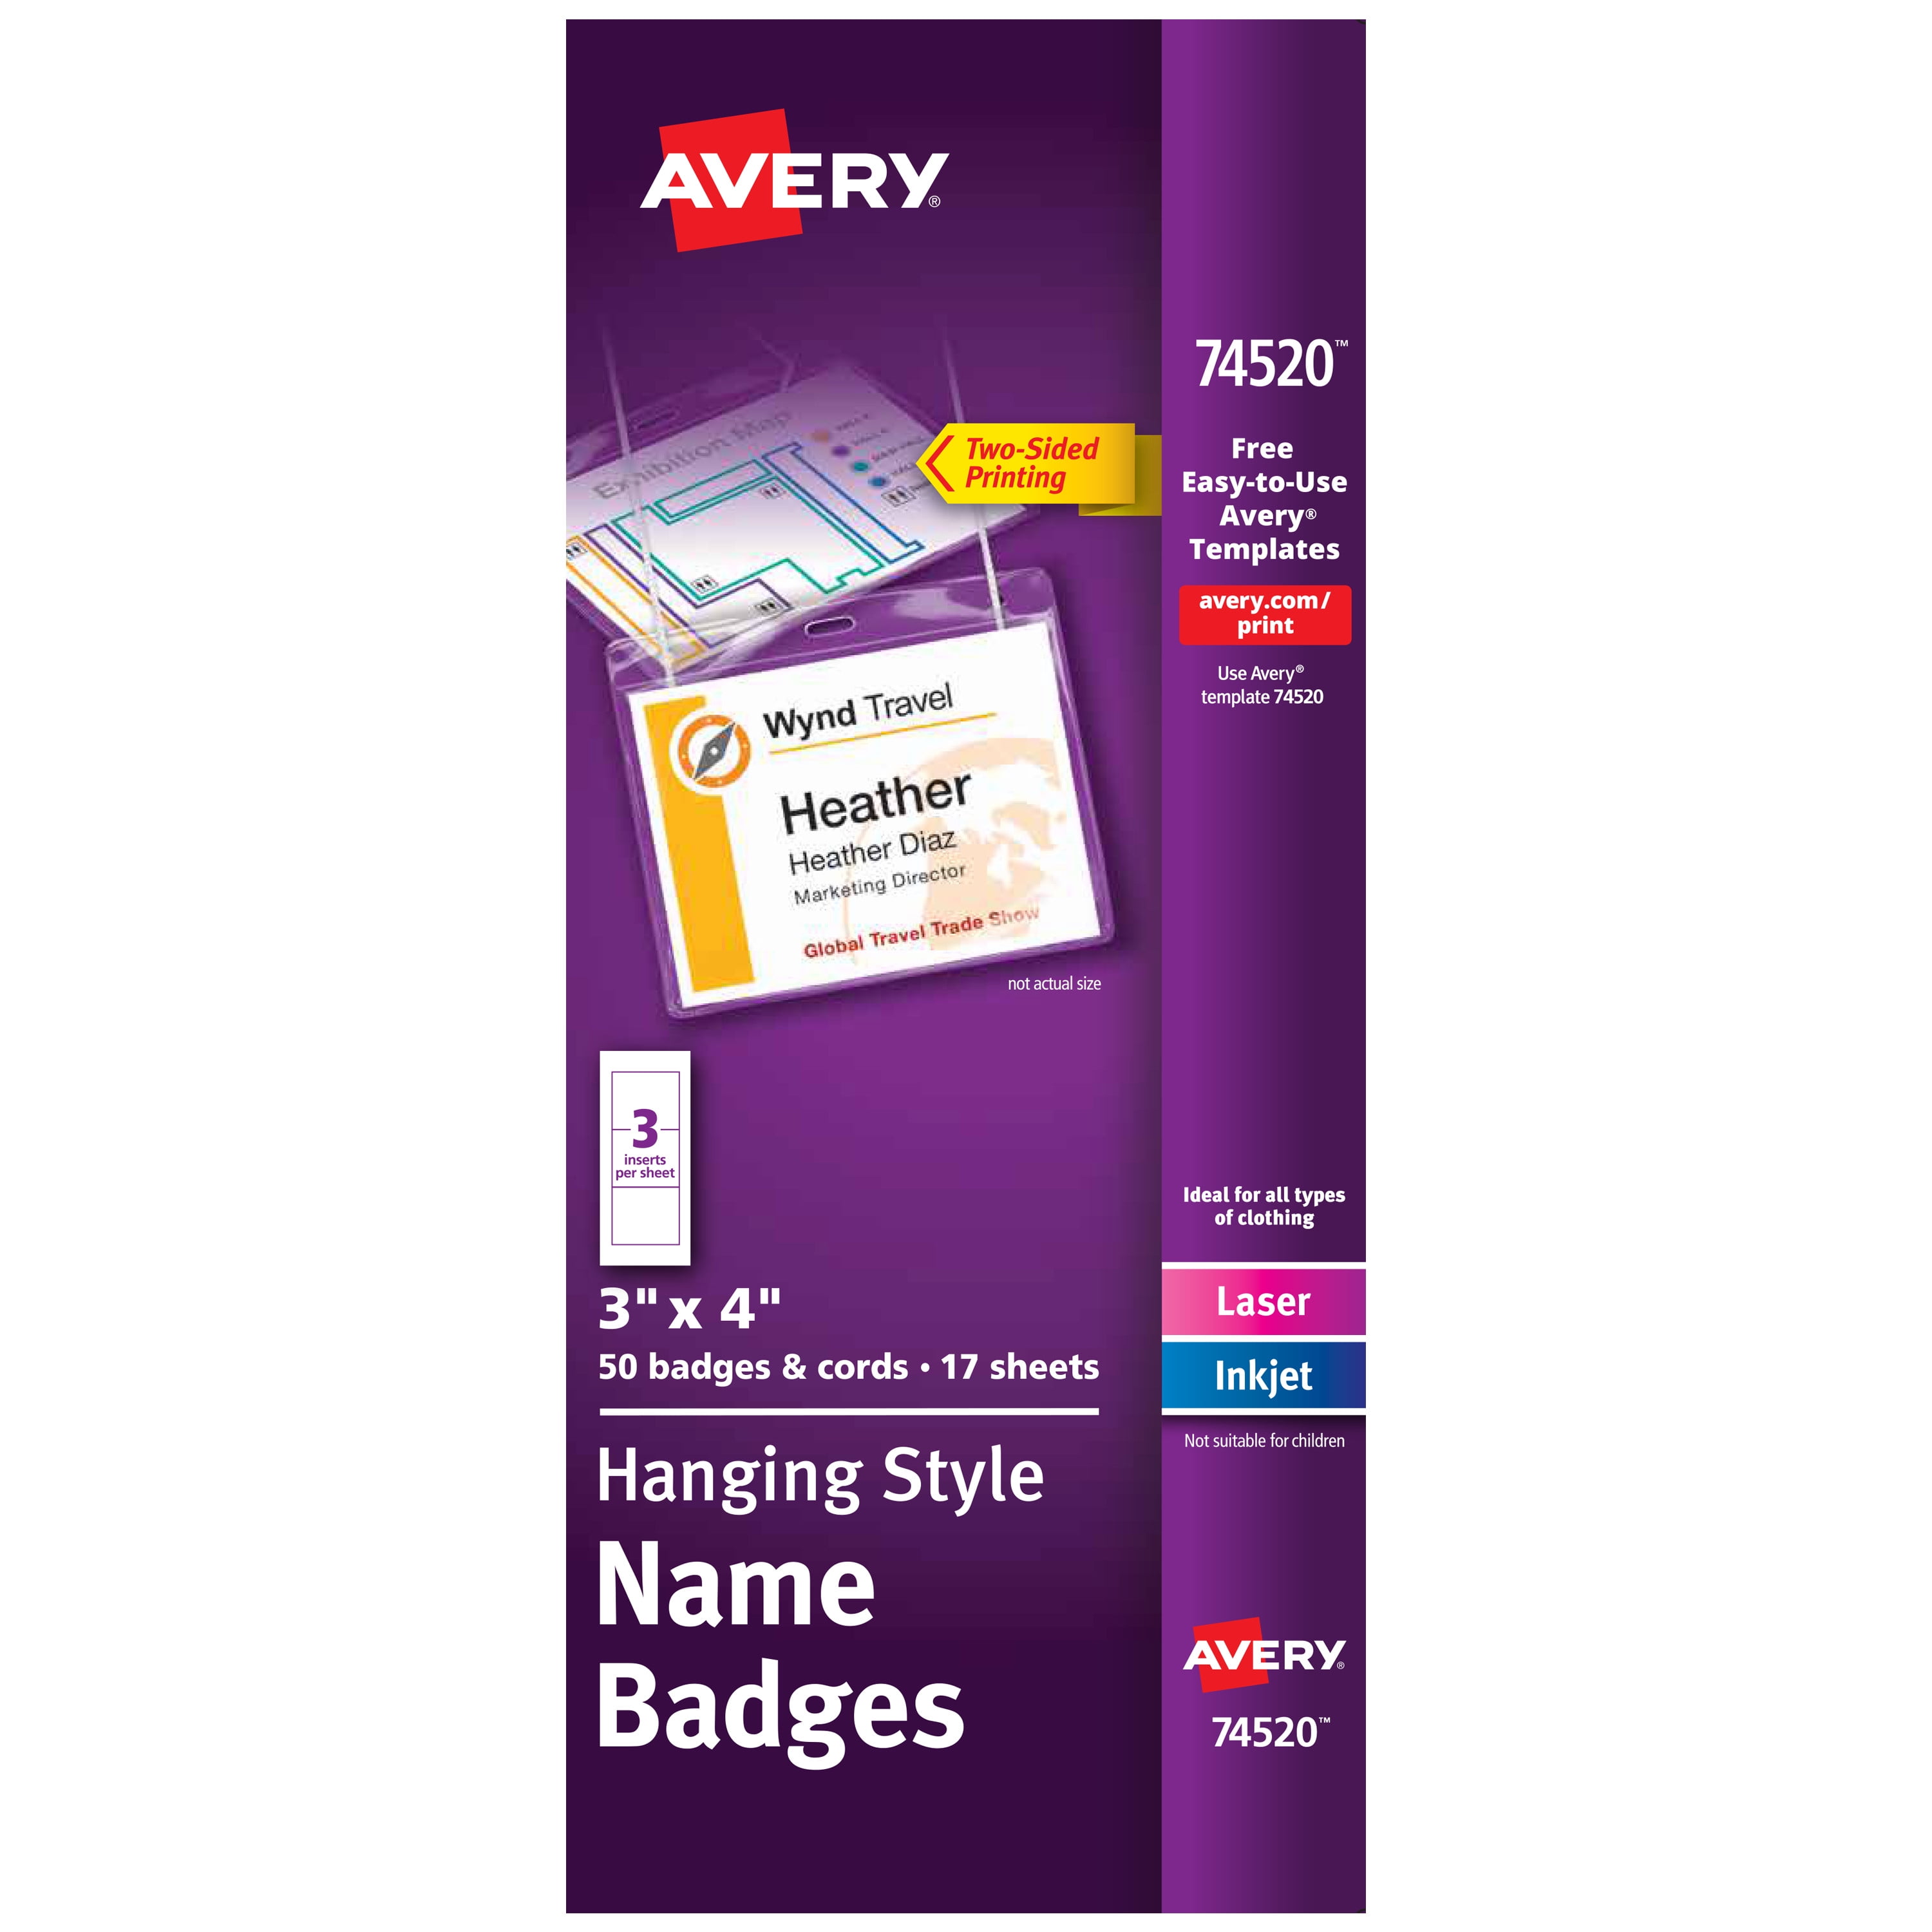 New Avery 2-1/4" x 3-1/2" Laser and Inkjet Pin Name Badges 74549 100pk 